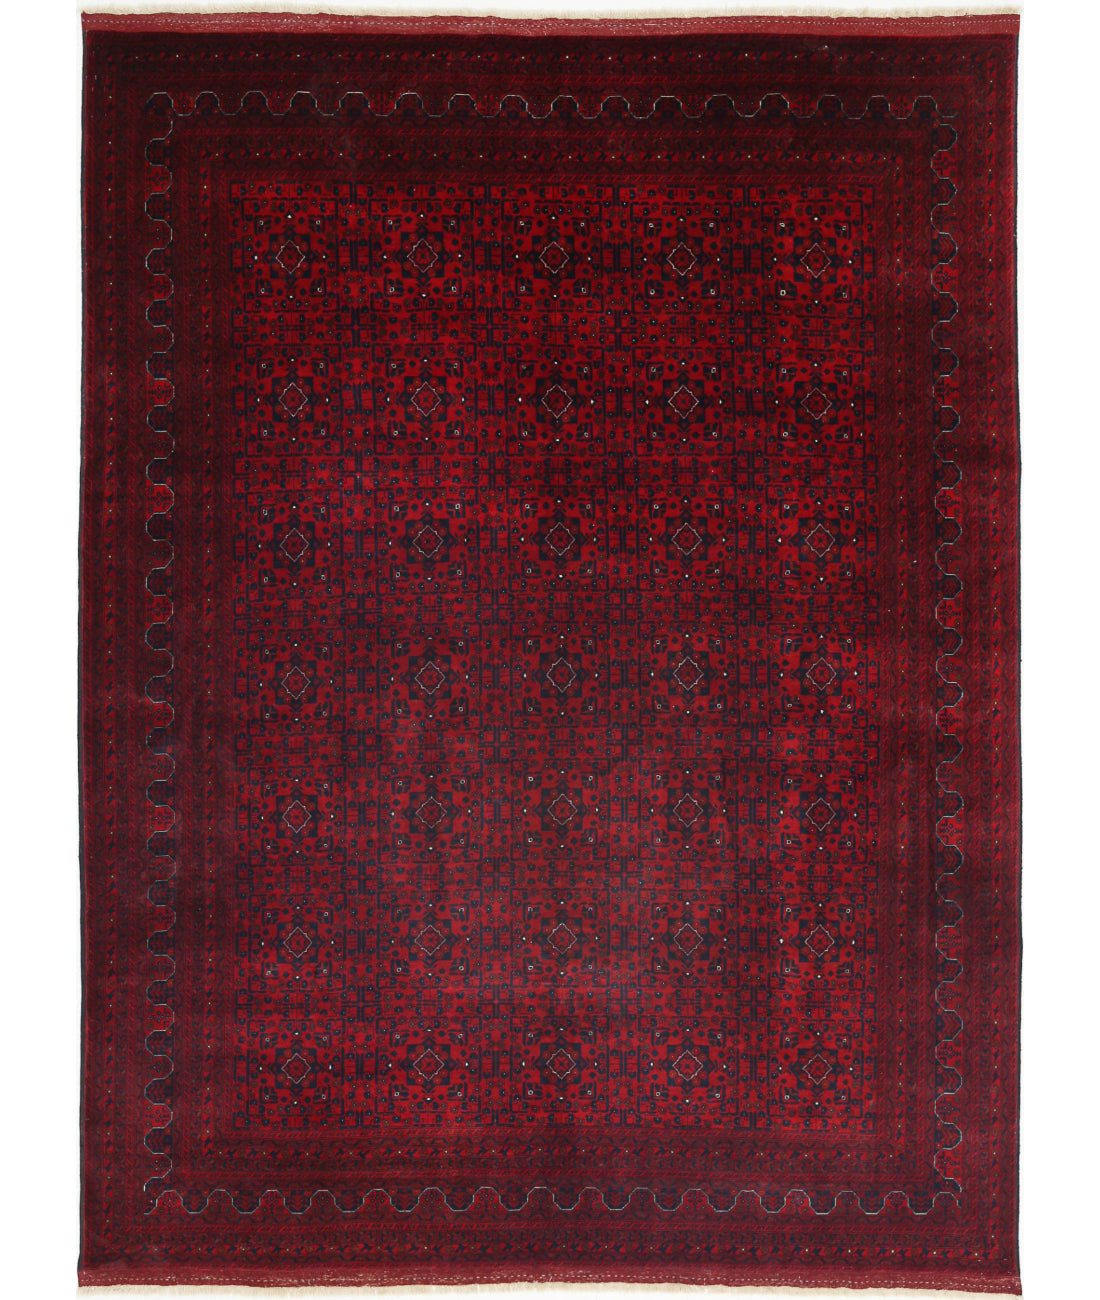 Hand Knotted Afghan Beljik Wool Rug - 8'2'' x 10'10'' 8'2'' x 10'10'' (245 X 325) / Red / Red